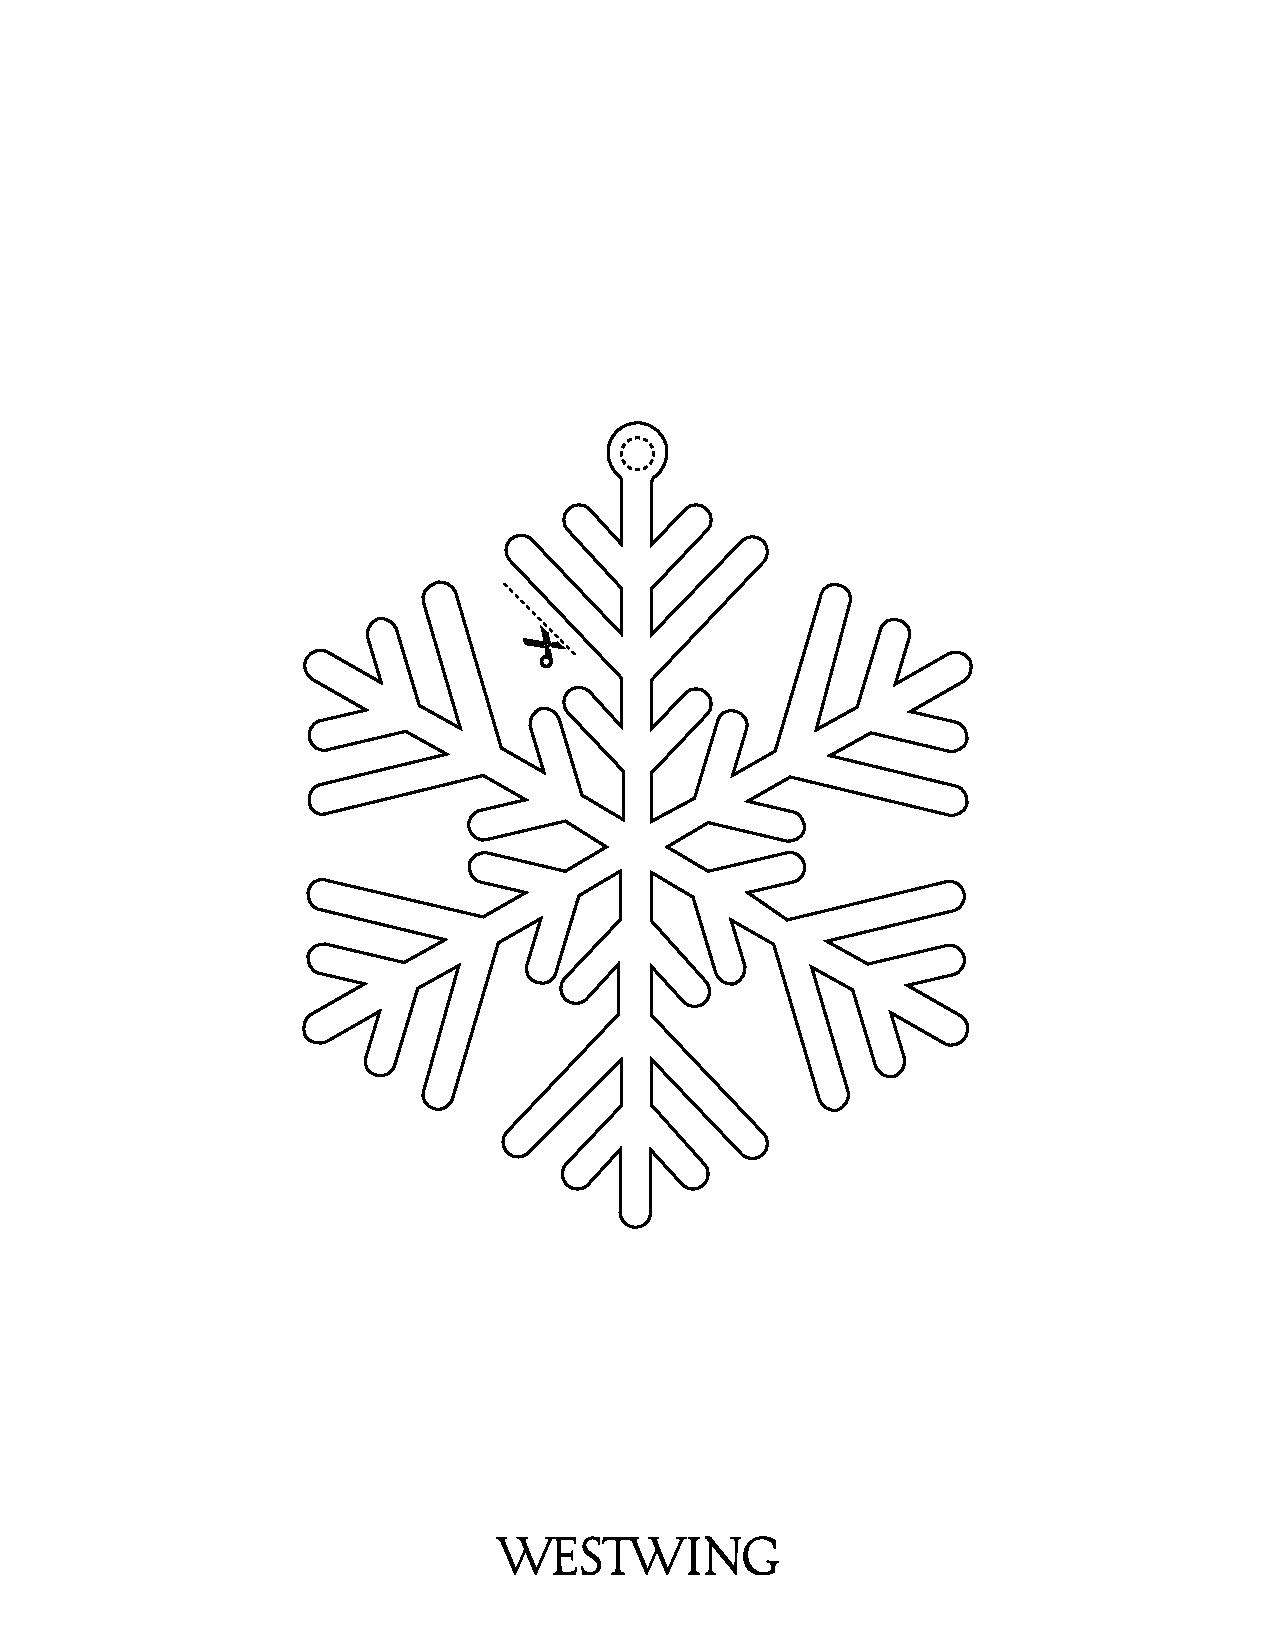 Nice snowflake to color and cut out, very simple, for children